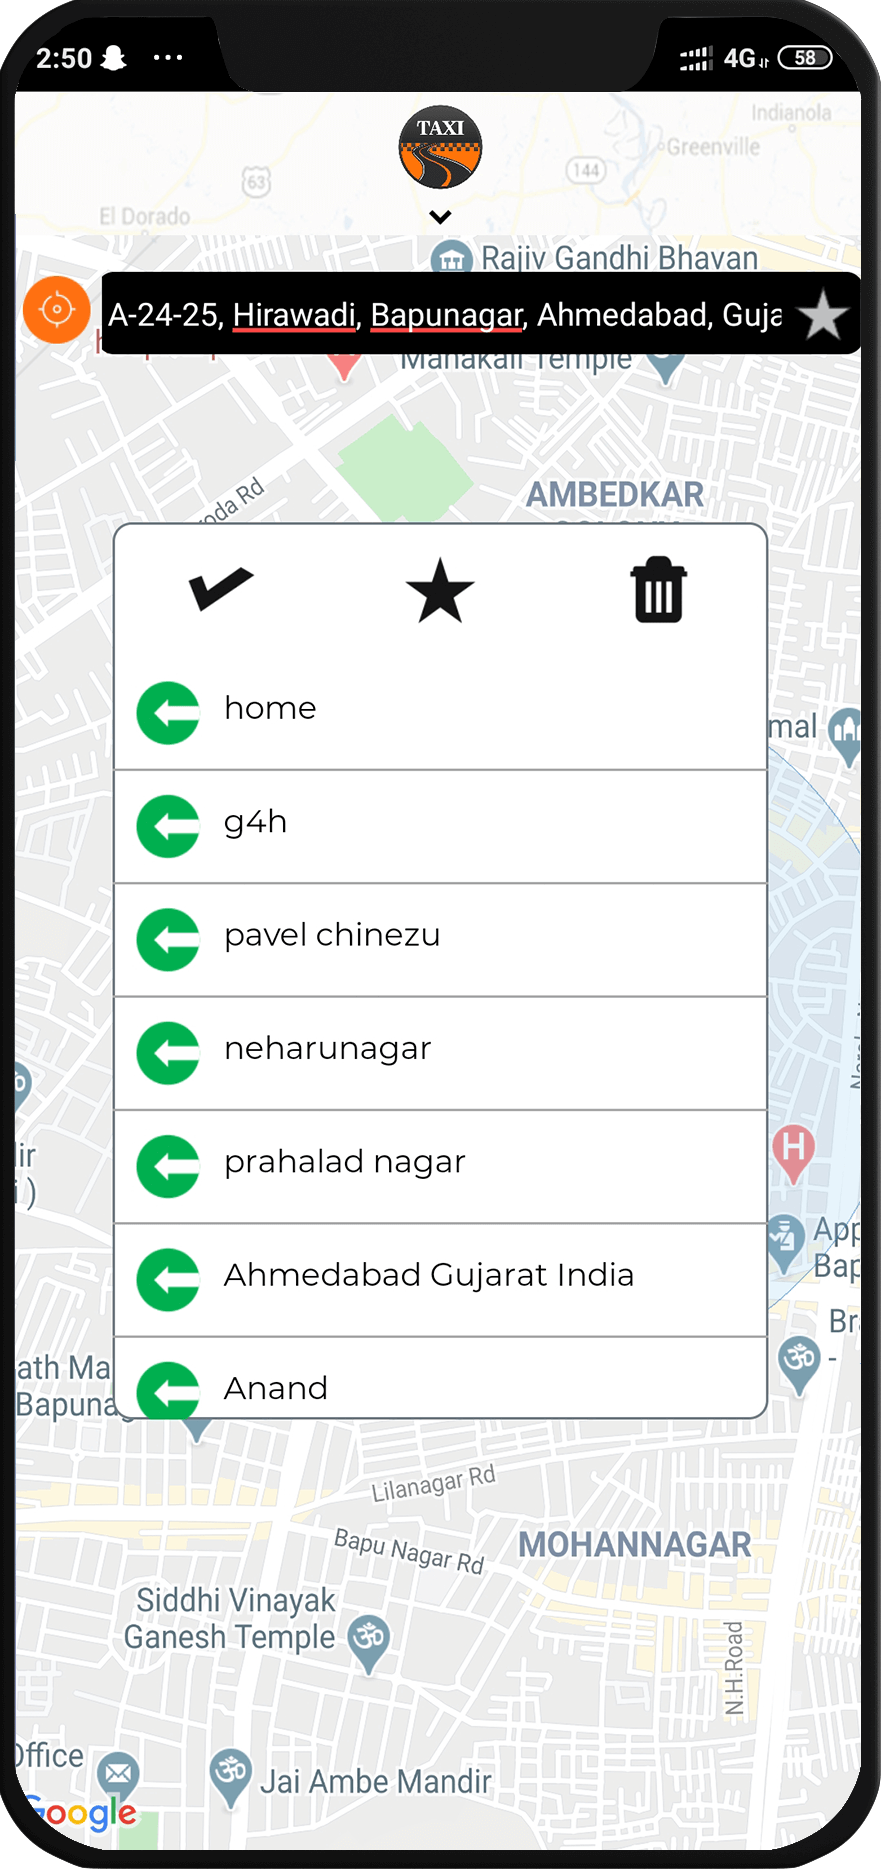 driver-features-taxi-app-clone